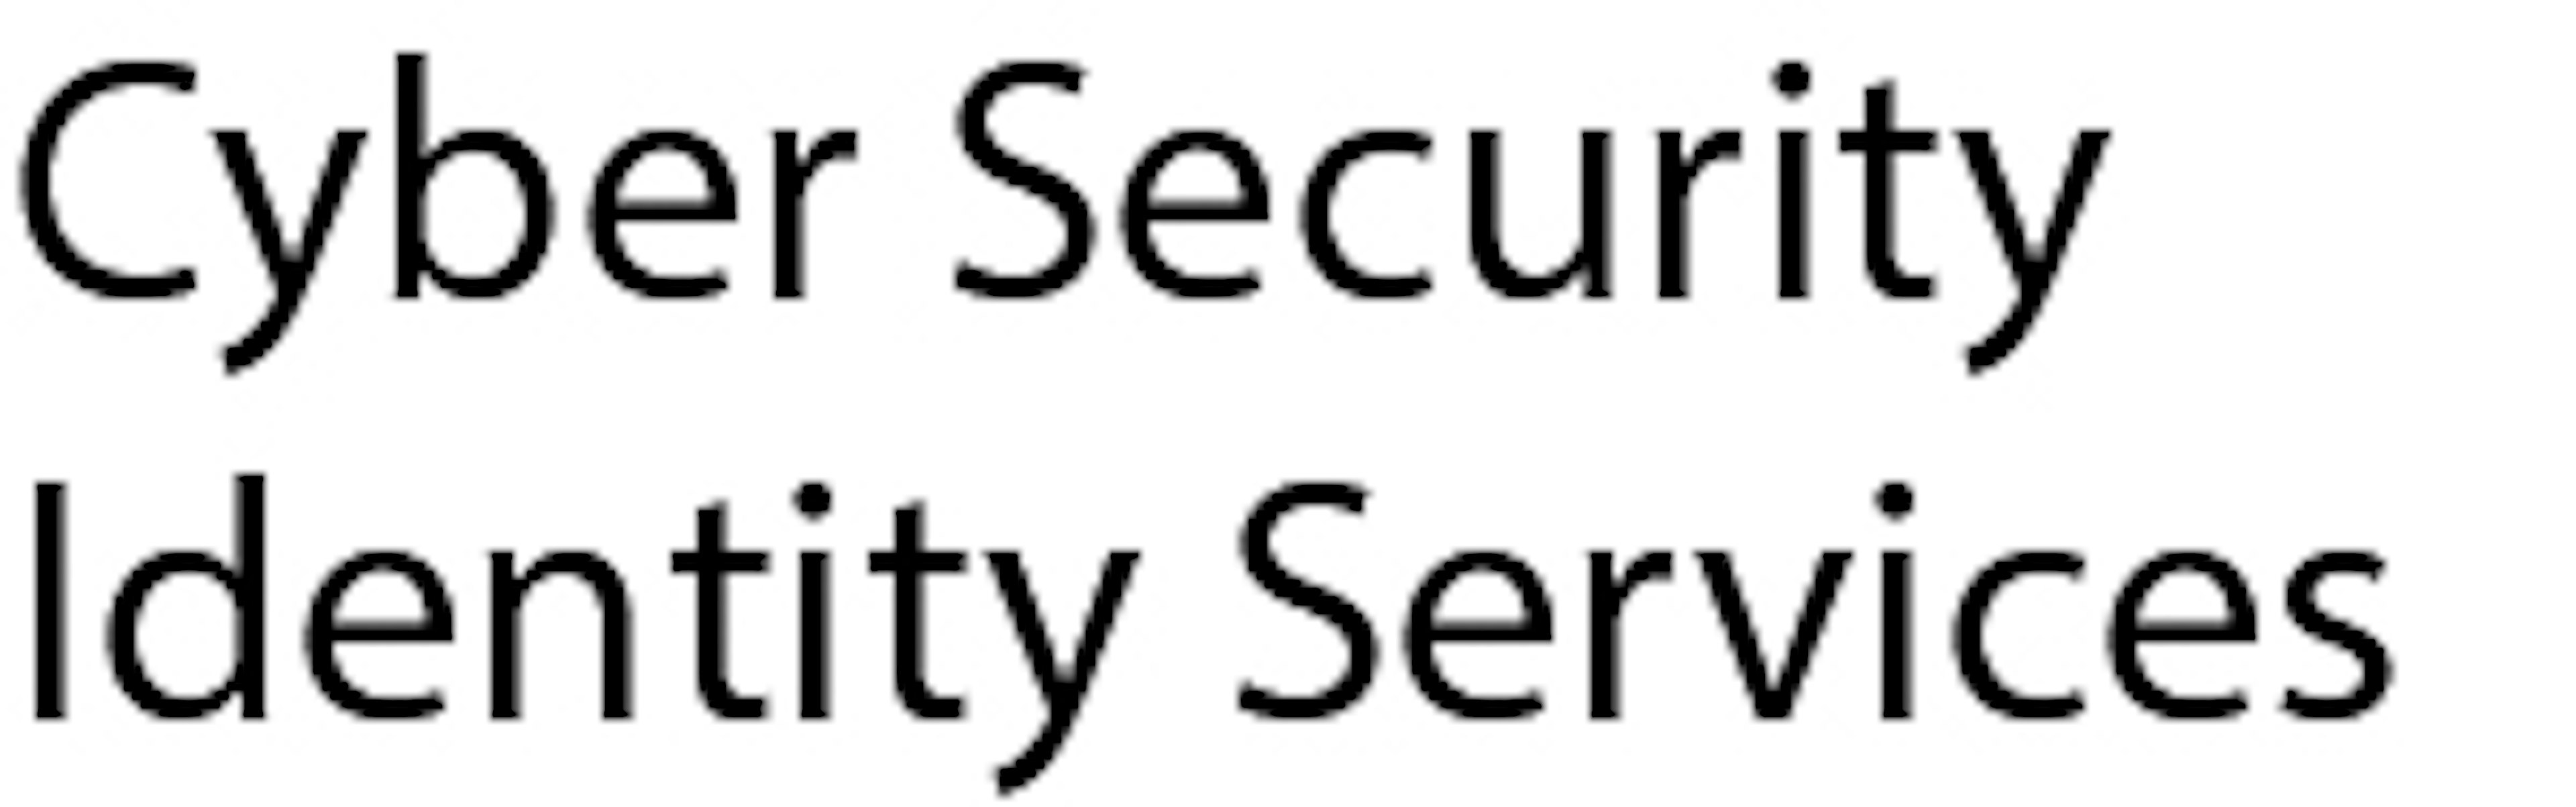 cyber-security-identity-services